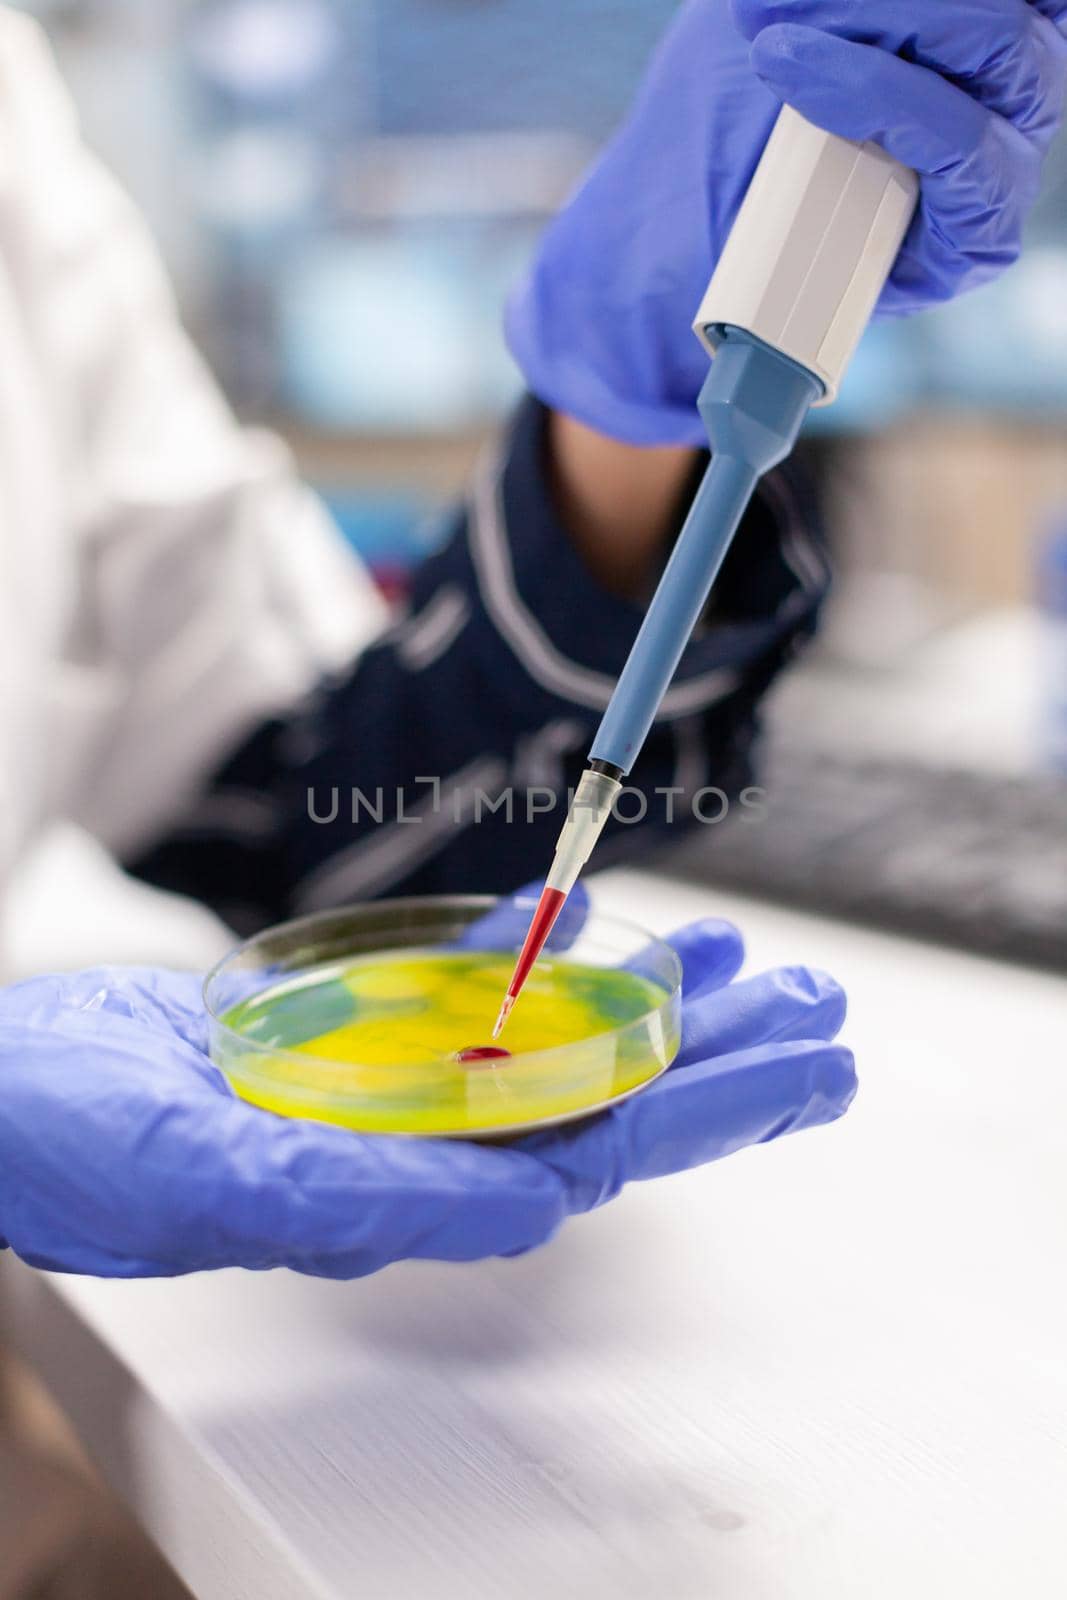 Close up of doctor dropping blood sample using micropipette in medicine lab. Medical stuff examining vaccine evolution using high tech and technology researching treatment, development.